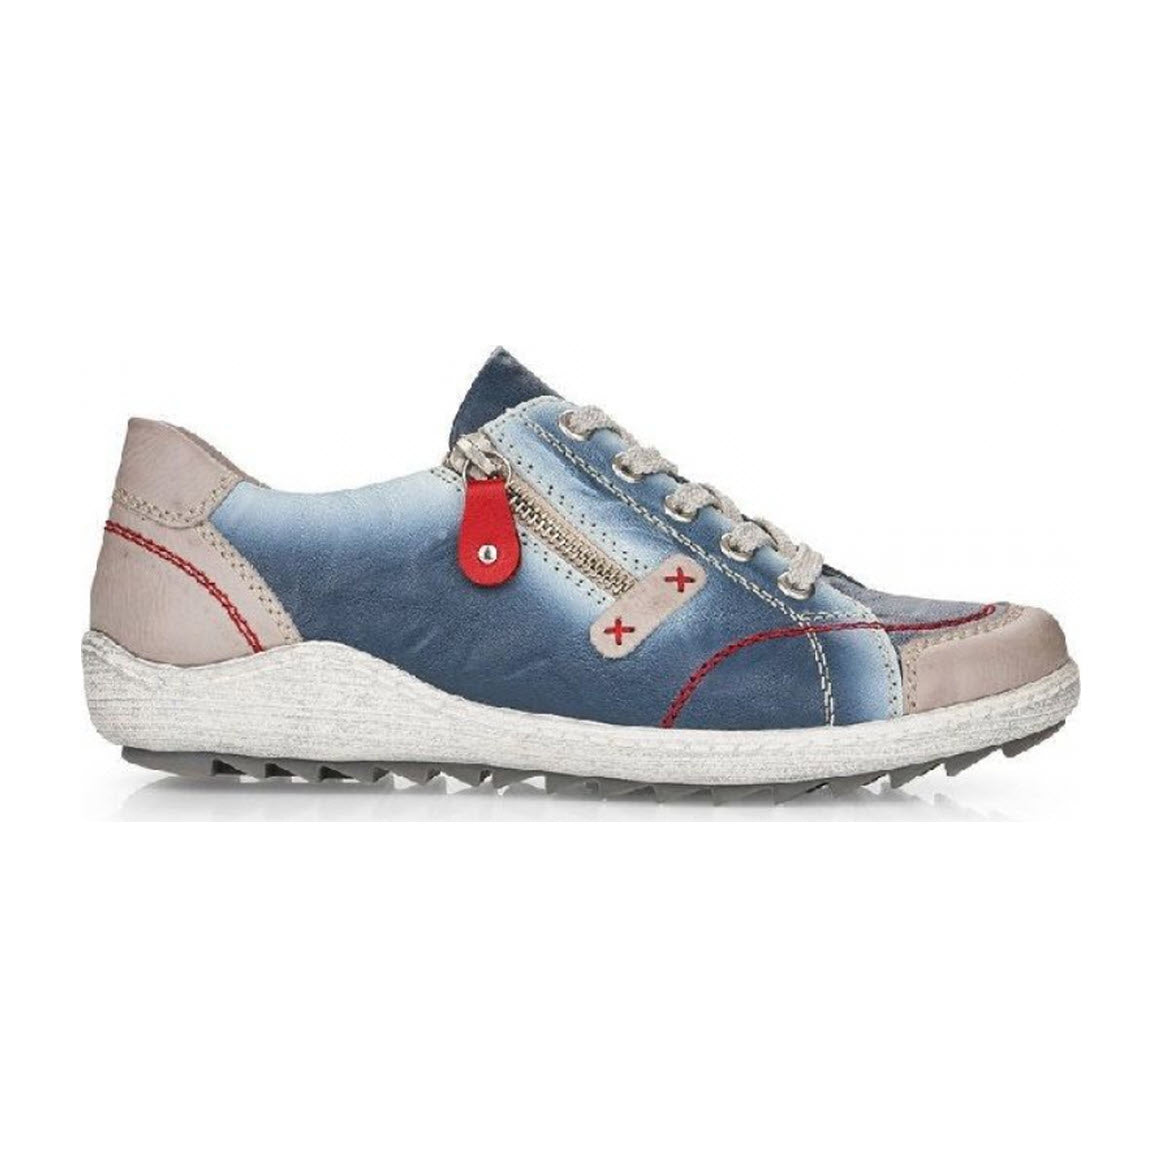 A single REMONTE EURO CITY WALKER BLUE MULTI sneaker in leather upper with red accents on a white background.